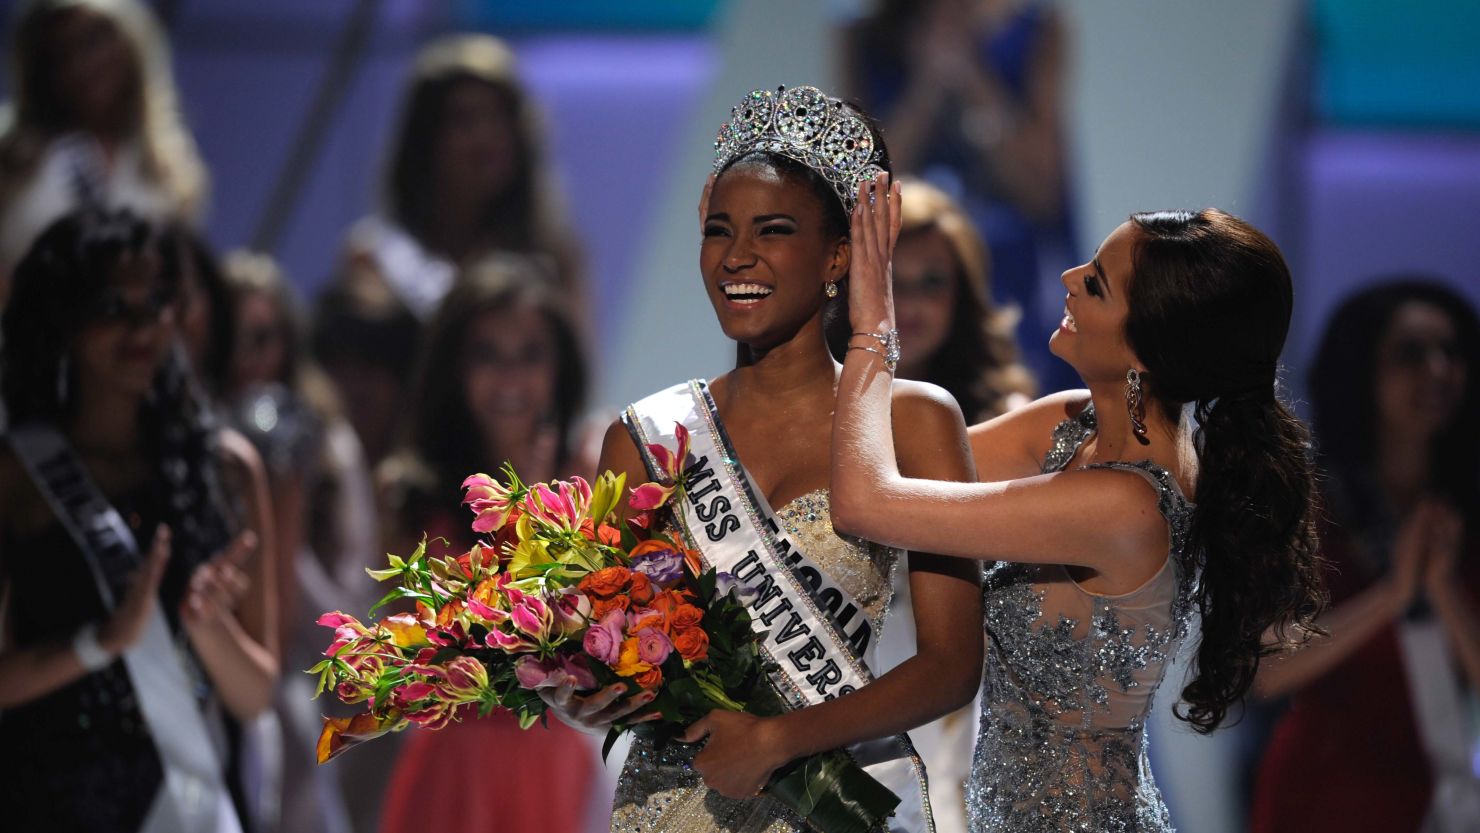 Miss Angola 2011, Leila Lopes, takes the crown Monday night as Miss Universe from last year's winner,  Miss Mexico.